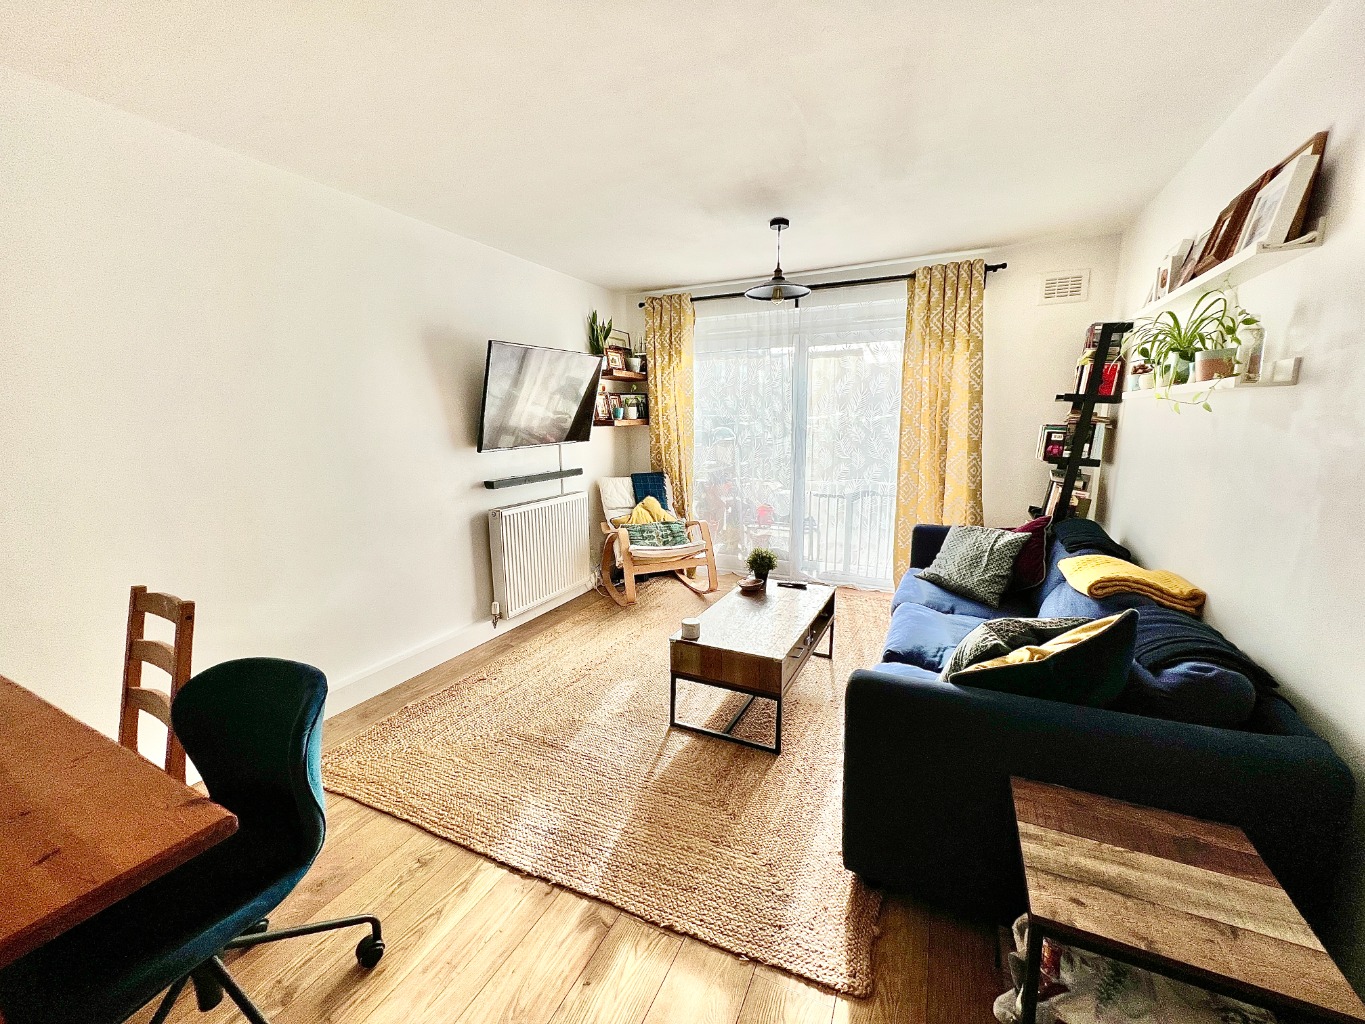 Beaumont Gibbs are delighted to offer this immaculately presented two double bedroomed ground floor maisonette for sale in Jessup Close, Woolwich.